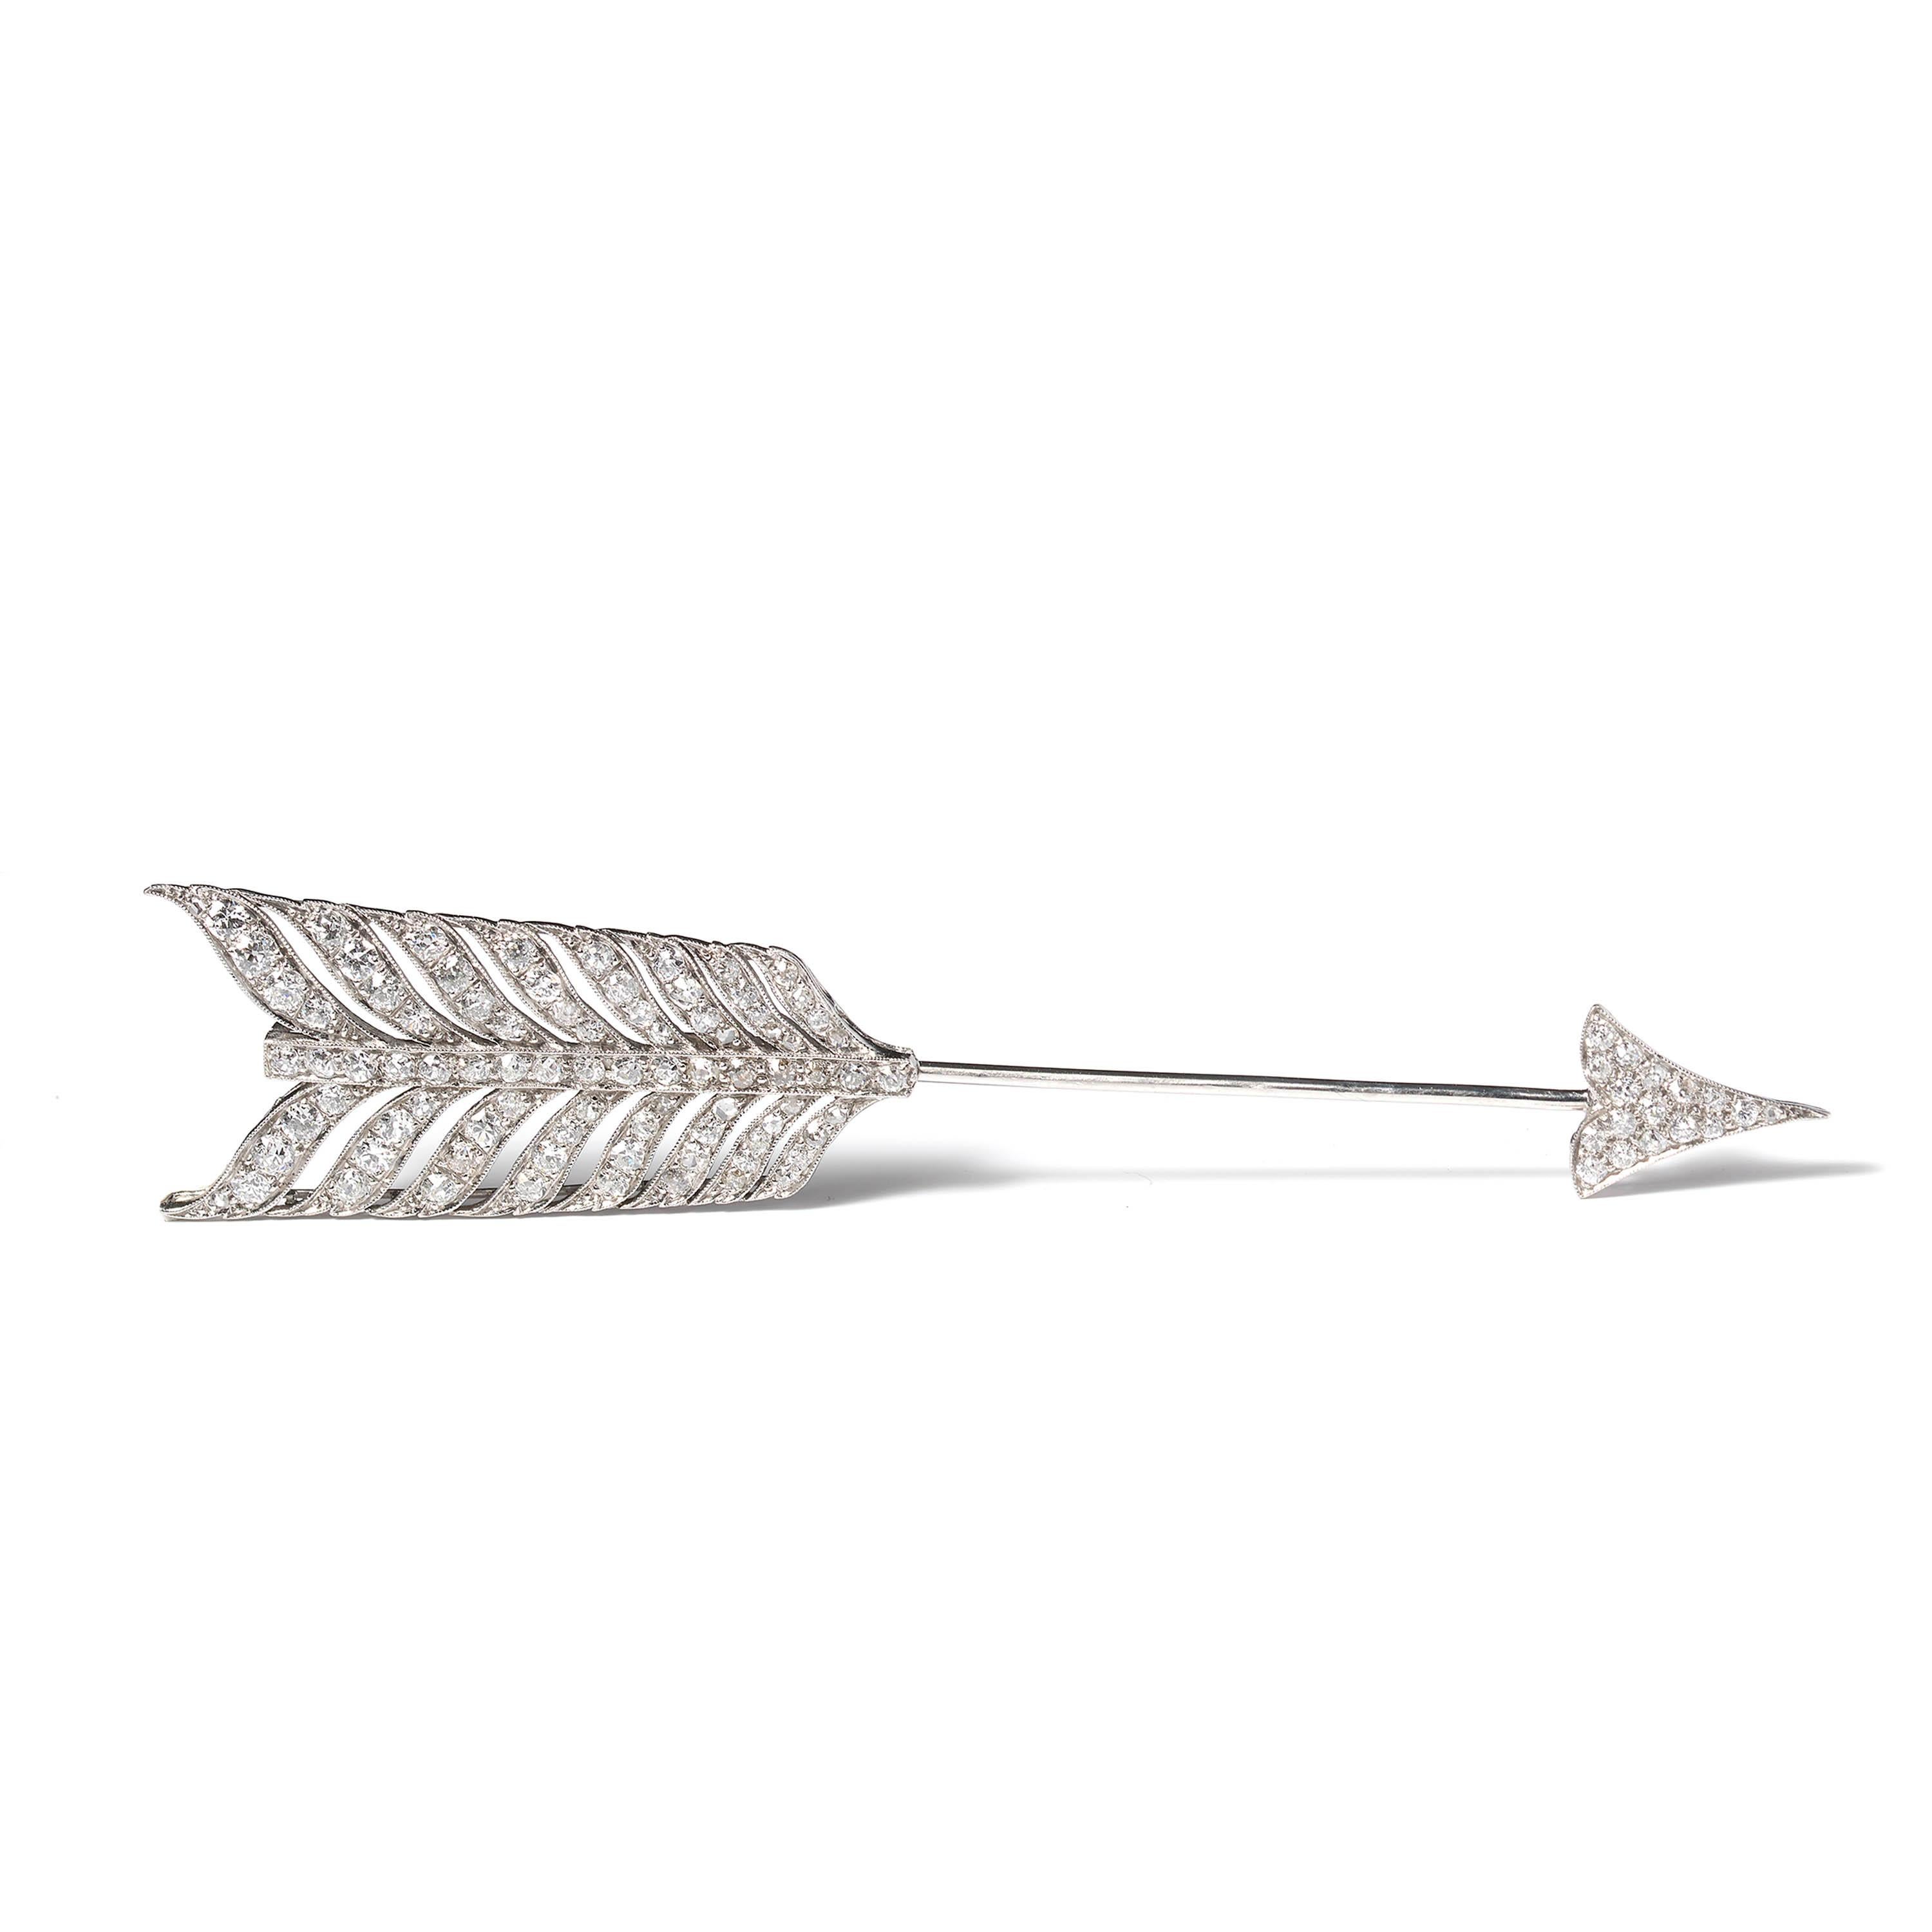 An Early 20th Century diamond set arrow jabot pin, set with old-cut, single-cut and rose-cut diamonds, weighing an estimated total of 4.40ct, mounted in platinum, circa 1910. Length 108mm